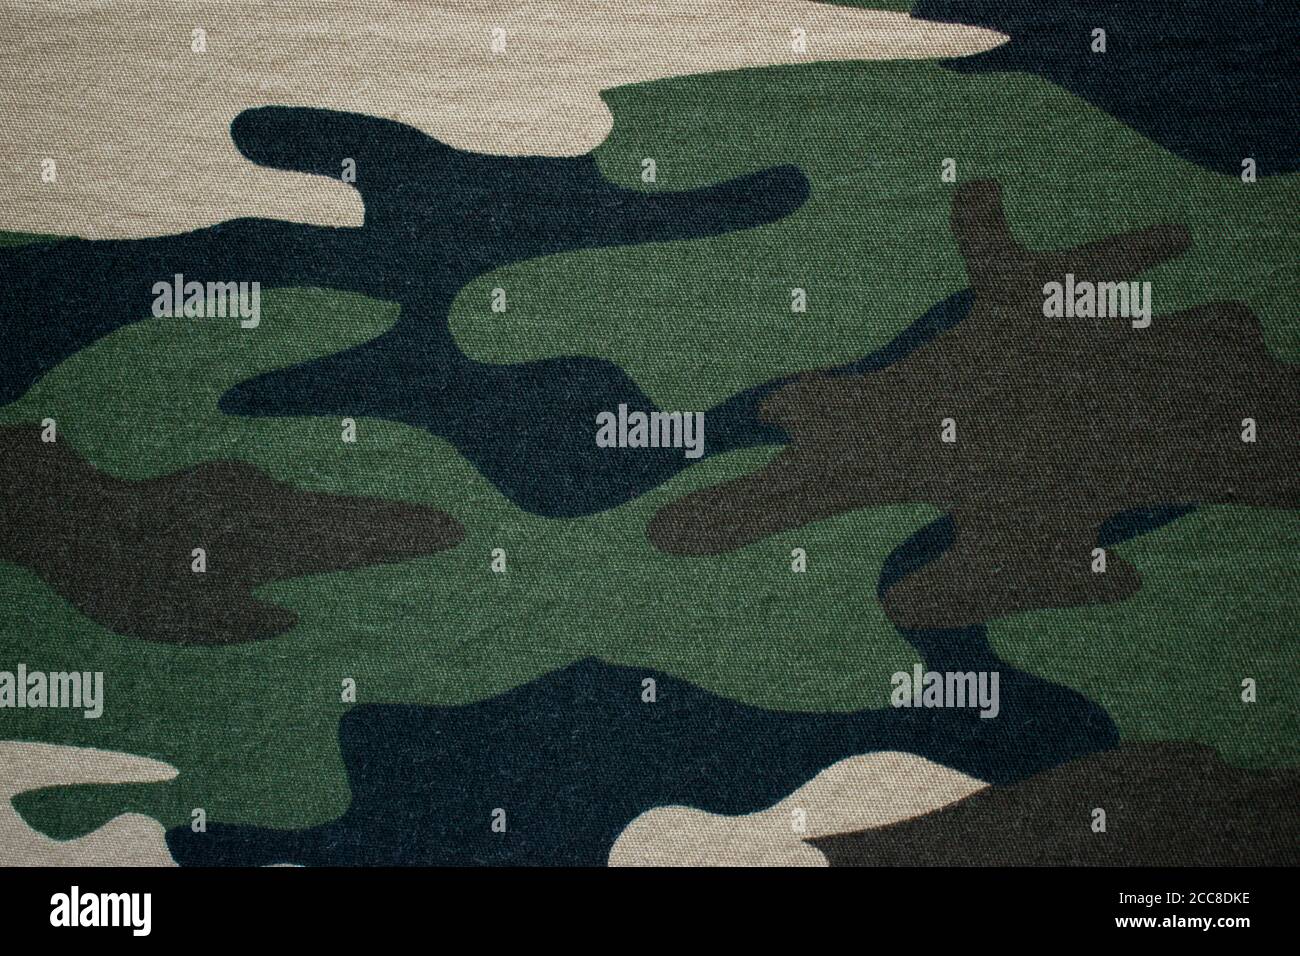 Green military camouflage fabric, cloth background with beige, brown and black spots Stock Photo